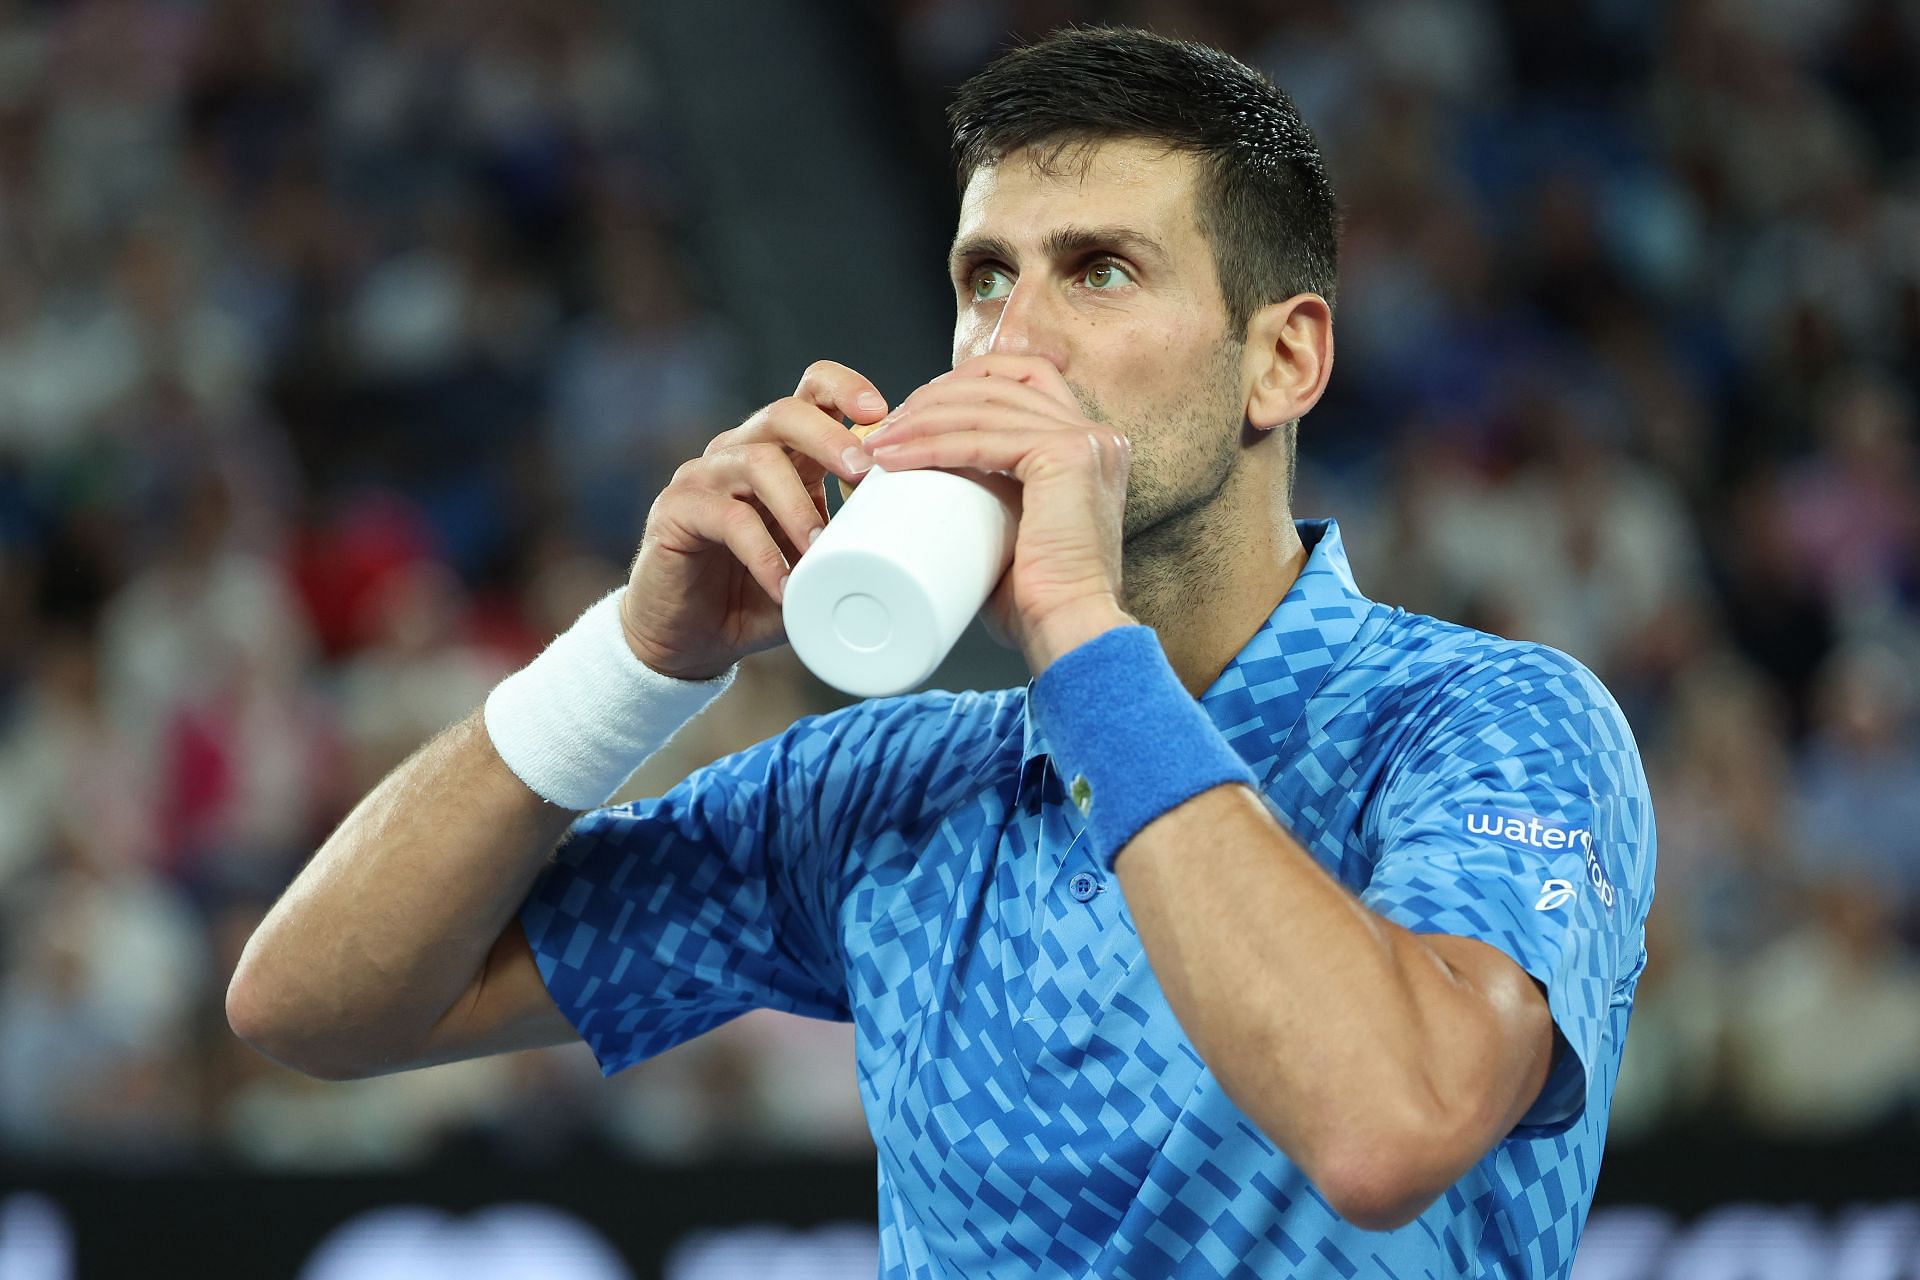 Novak Djokovic cools down between games in the Men&rsquo;s Singles Final against Stefanos Tsitsipas